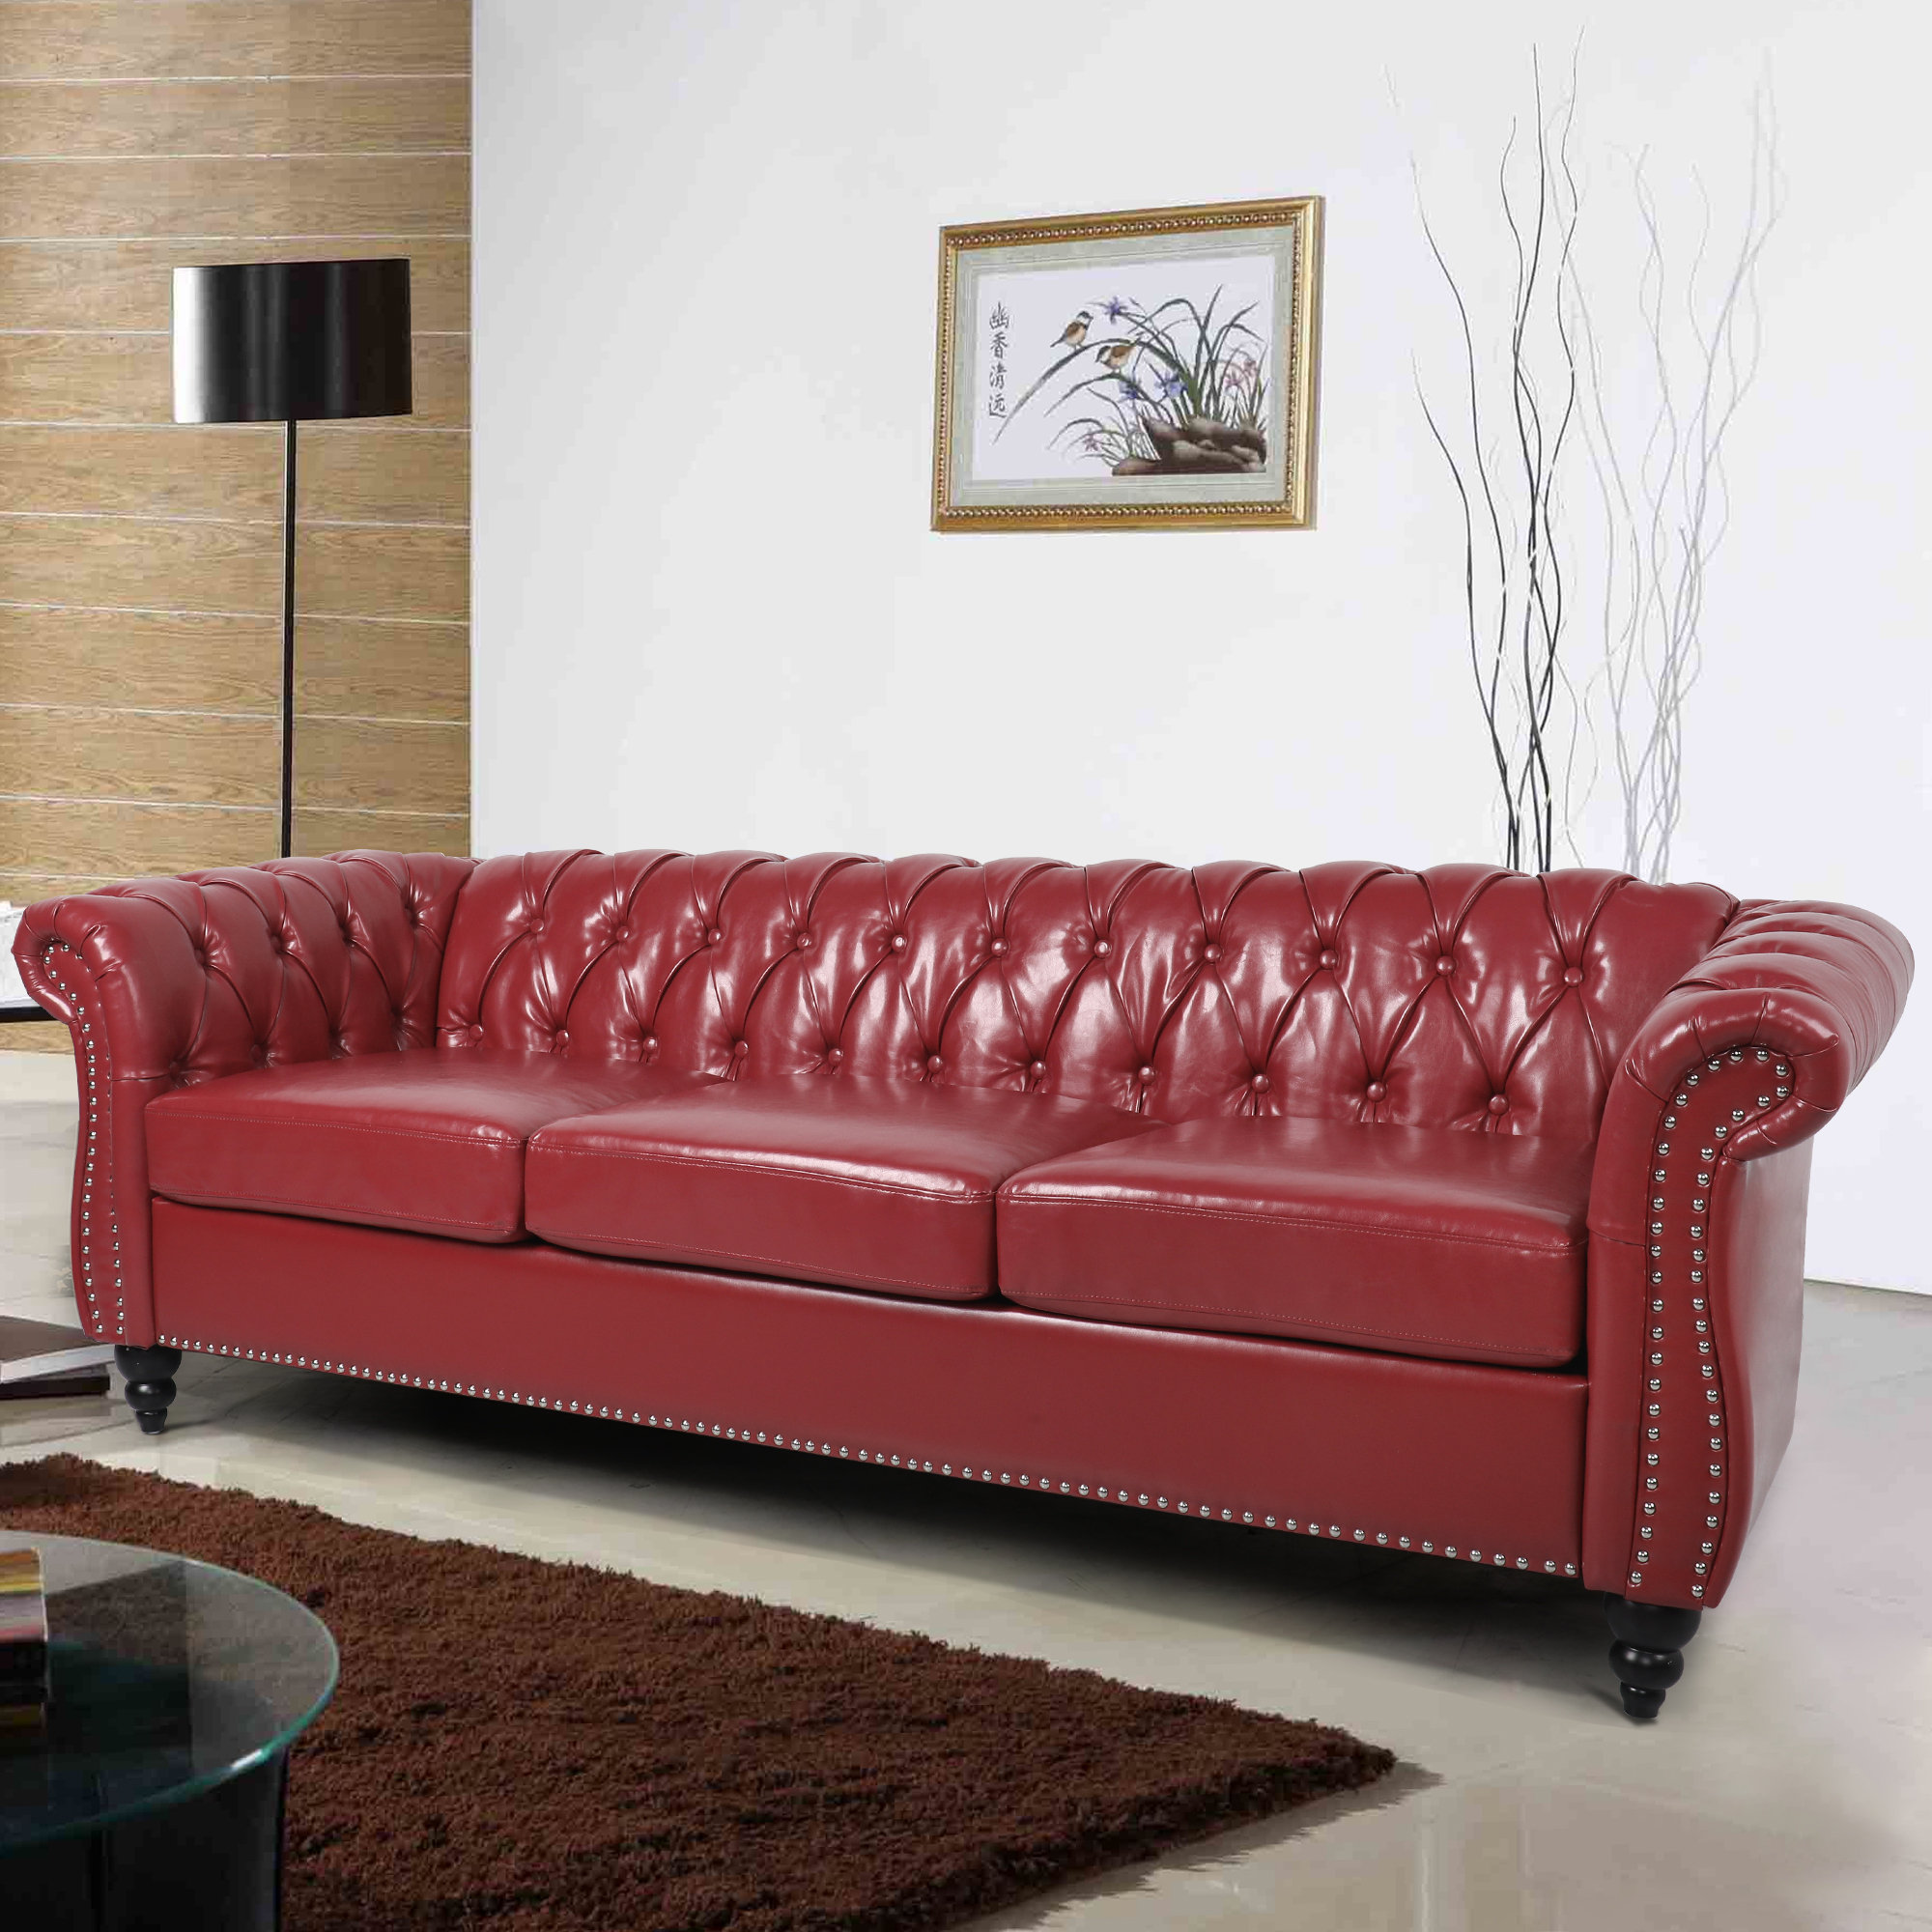 Red Chesterfield Sofa Designs